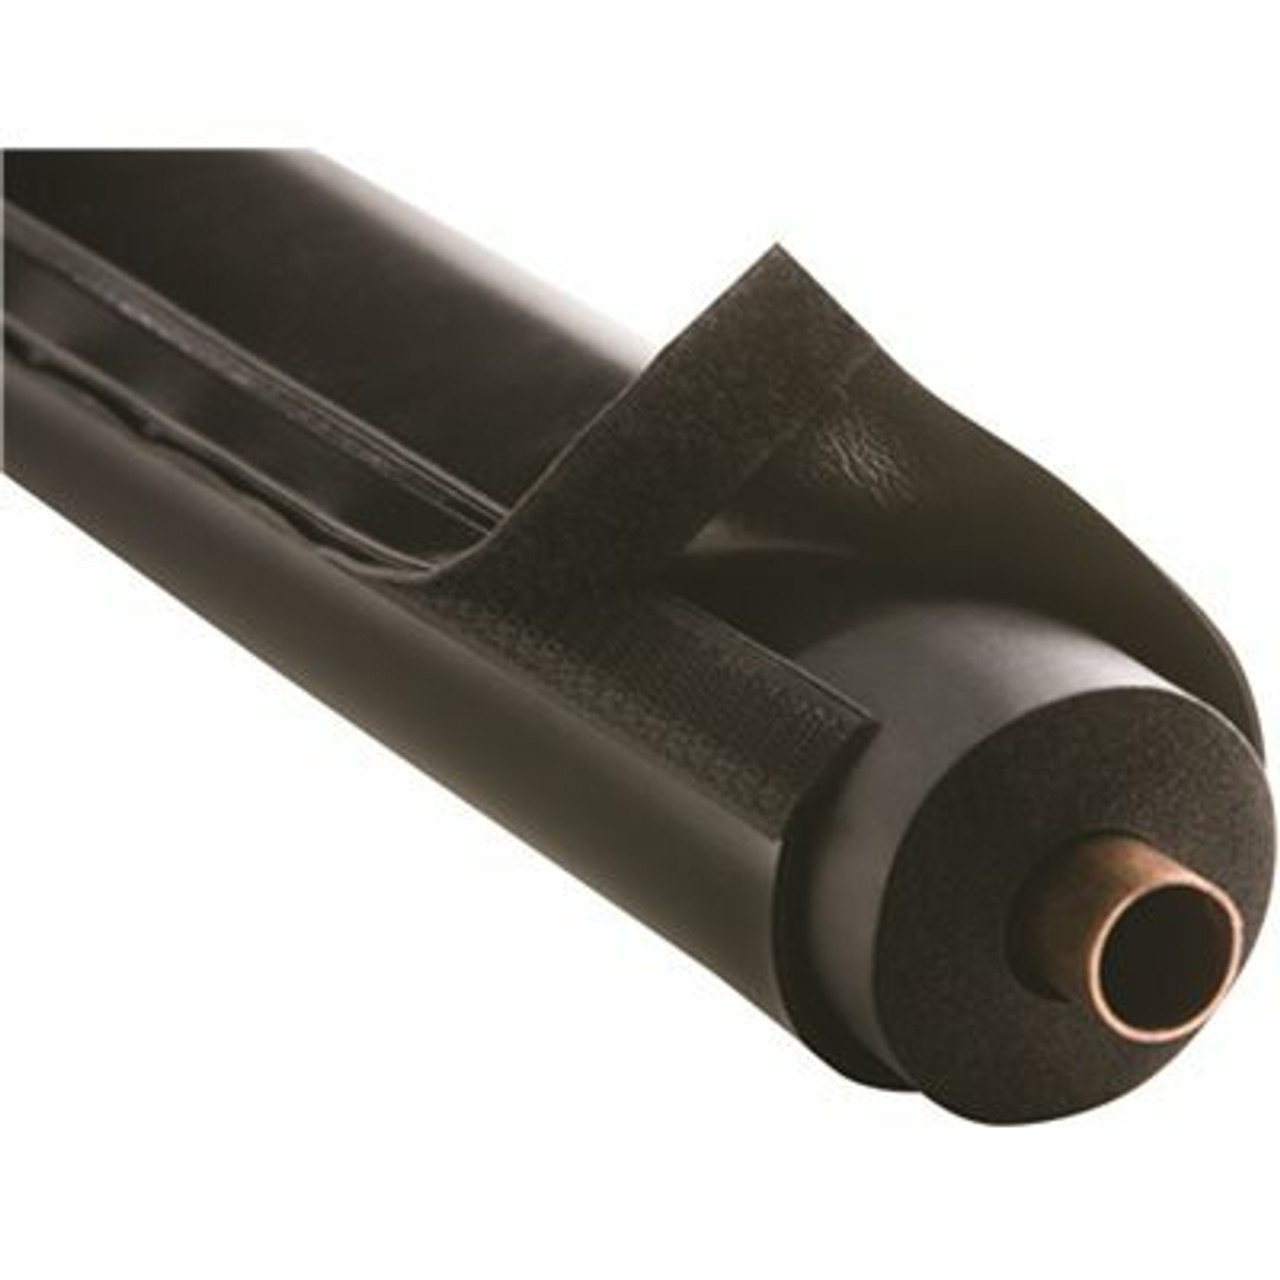 Airex Mfg. Airex E-Flex Guard, Hvac Line Set And Outdoor Pipe Insulation Protection, Fits 1/2 In. Insulation, Black